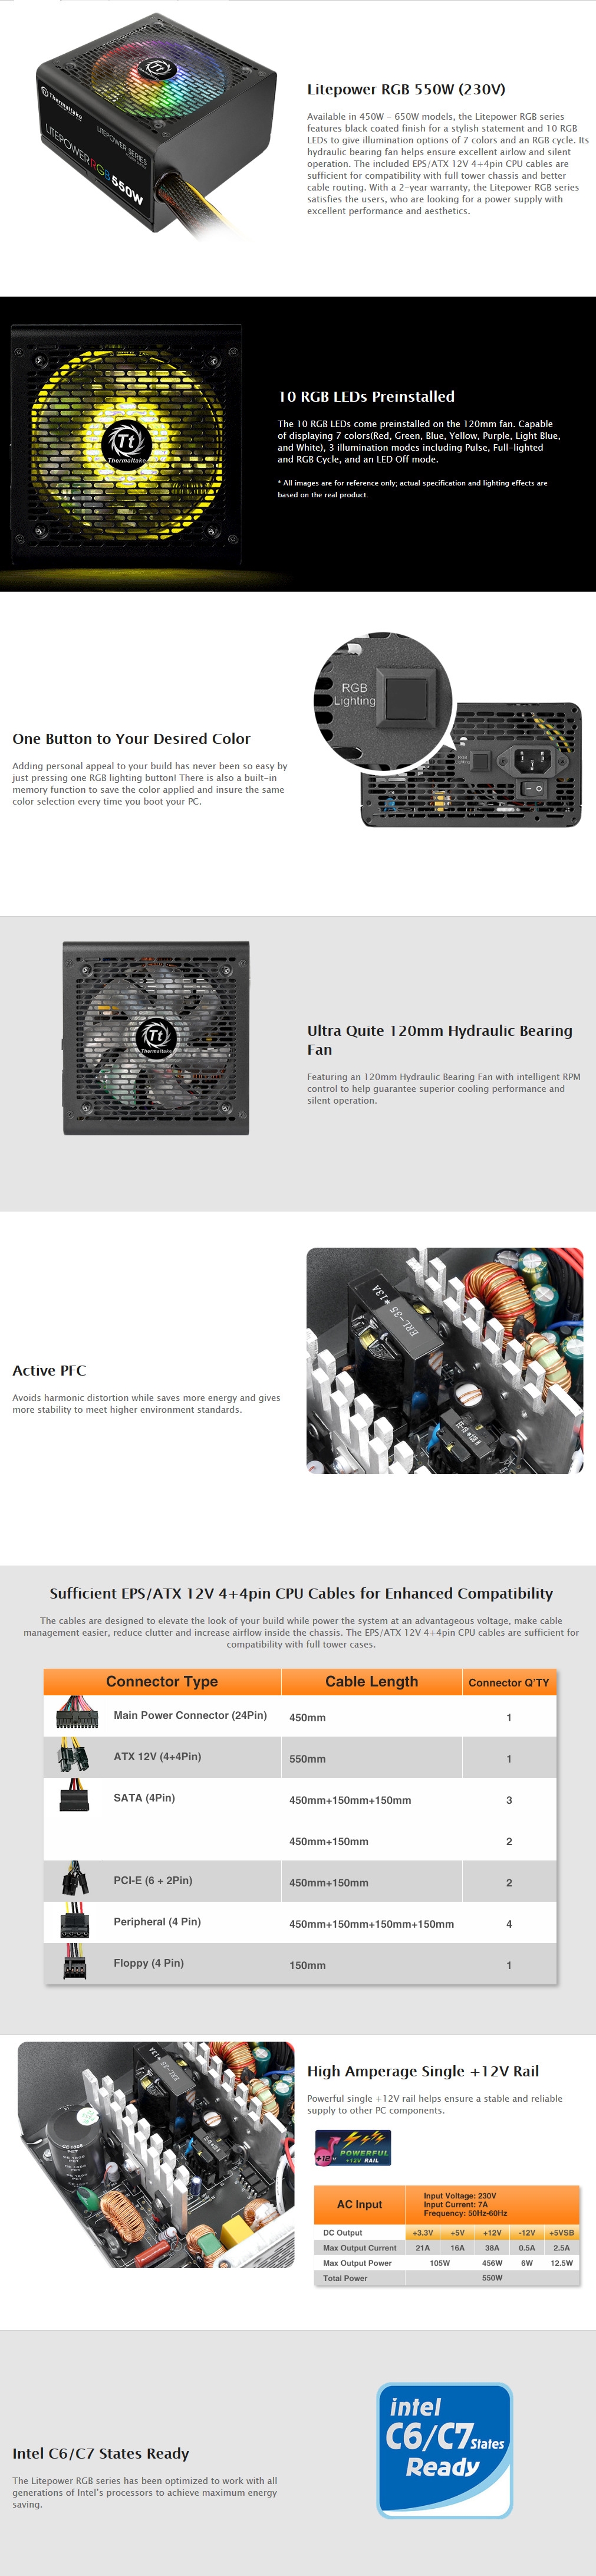 A large marketing image providing additional information about the product Thermaltake Litepower RGB 550W White ATX PSU - Additional alt info not provided